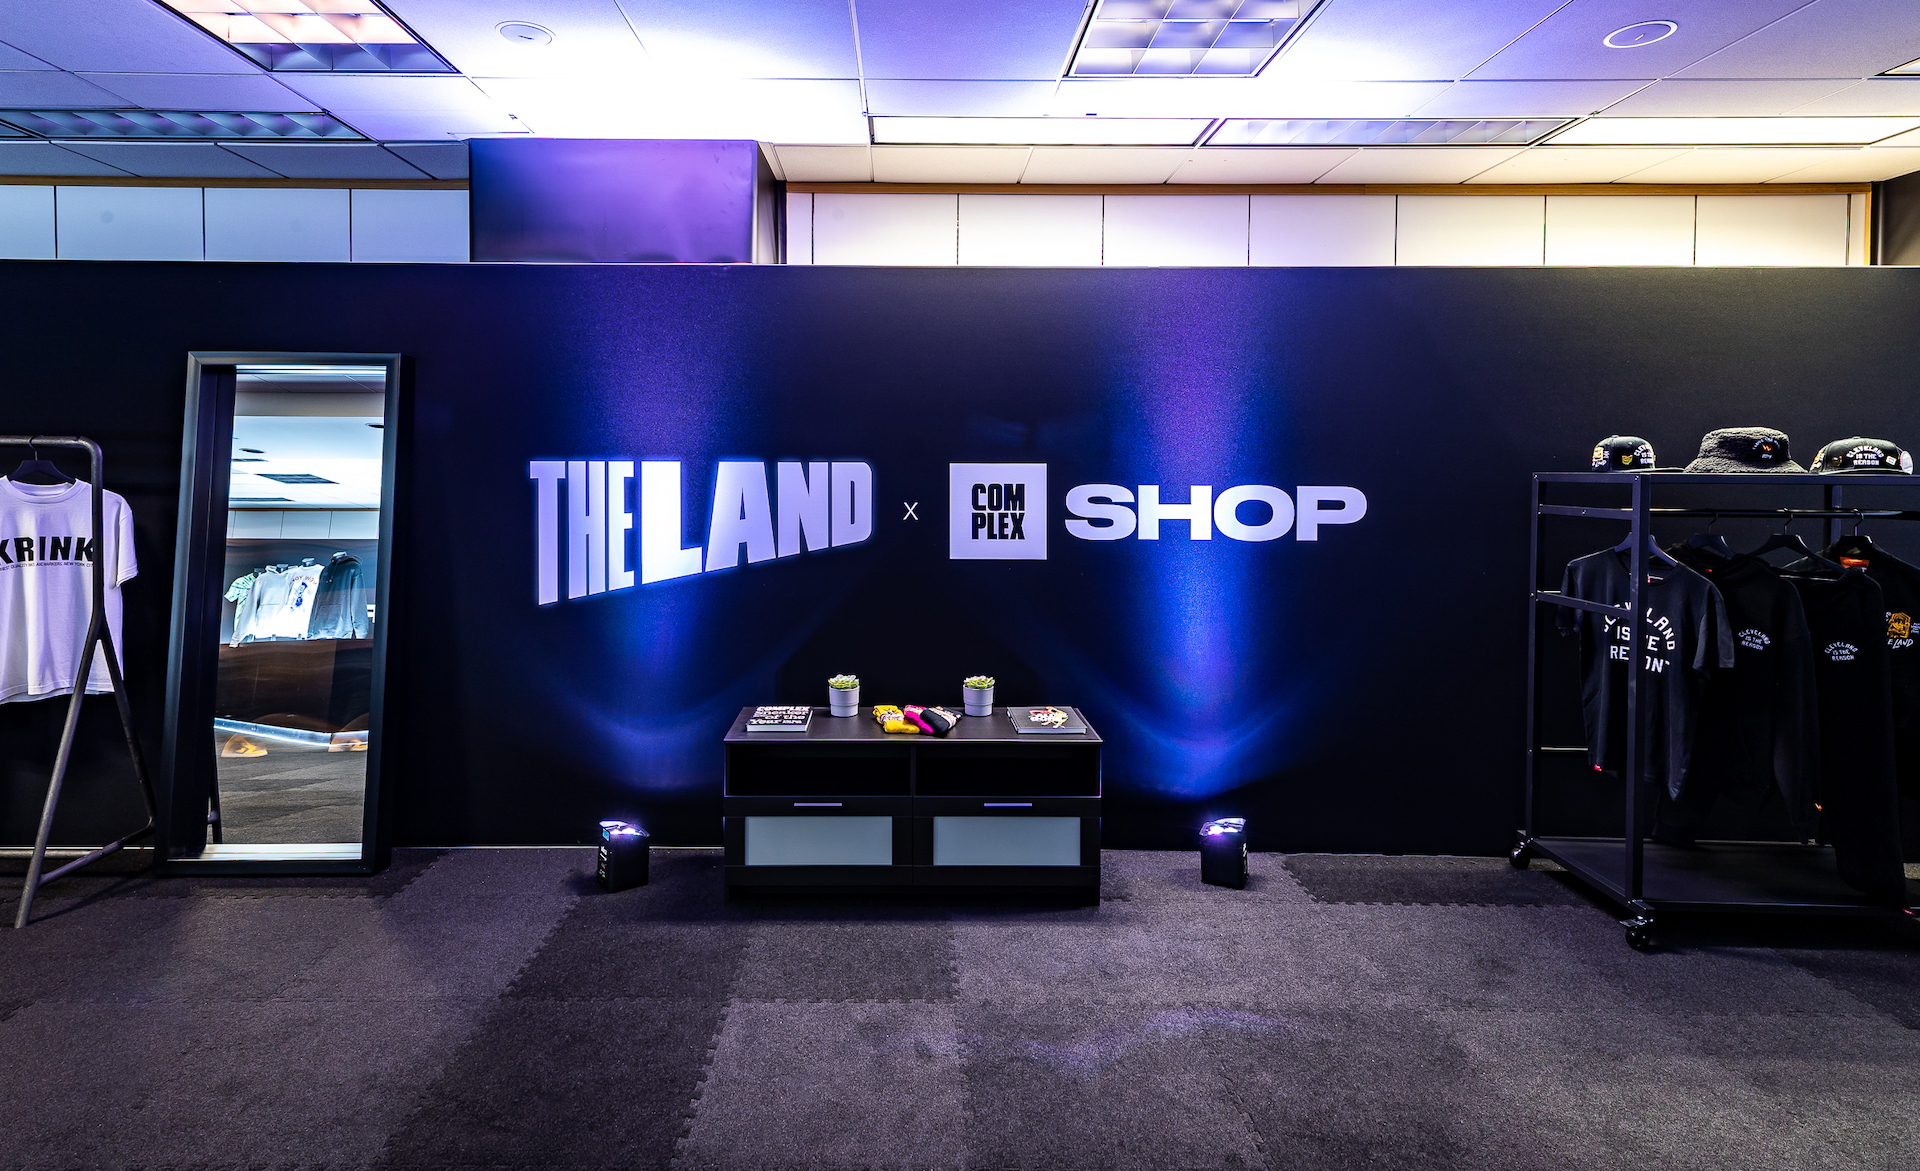 The Land and Complex SHOP Bring Pop-Up Experience to Tower City in Cleveland